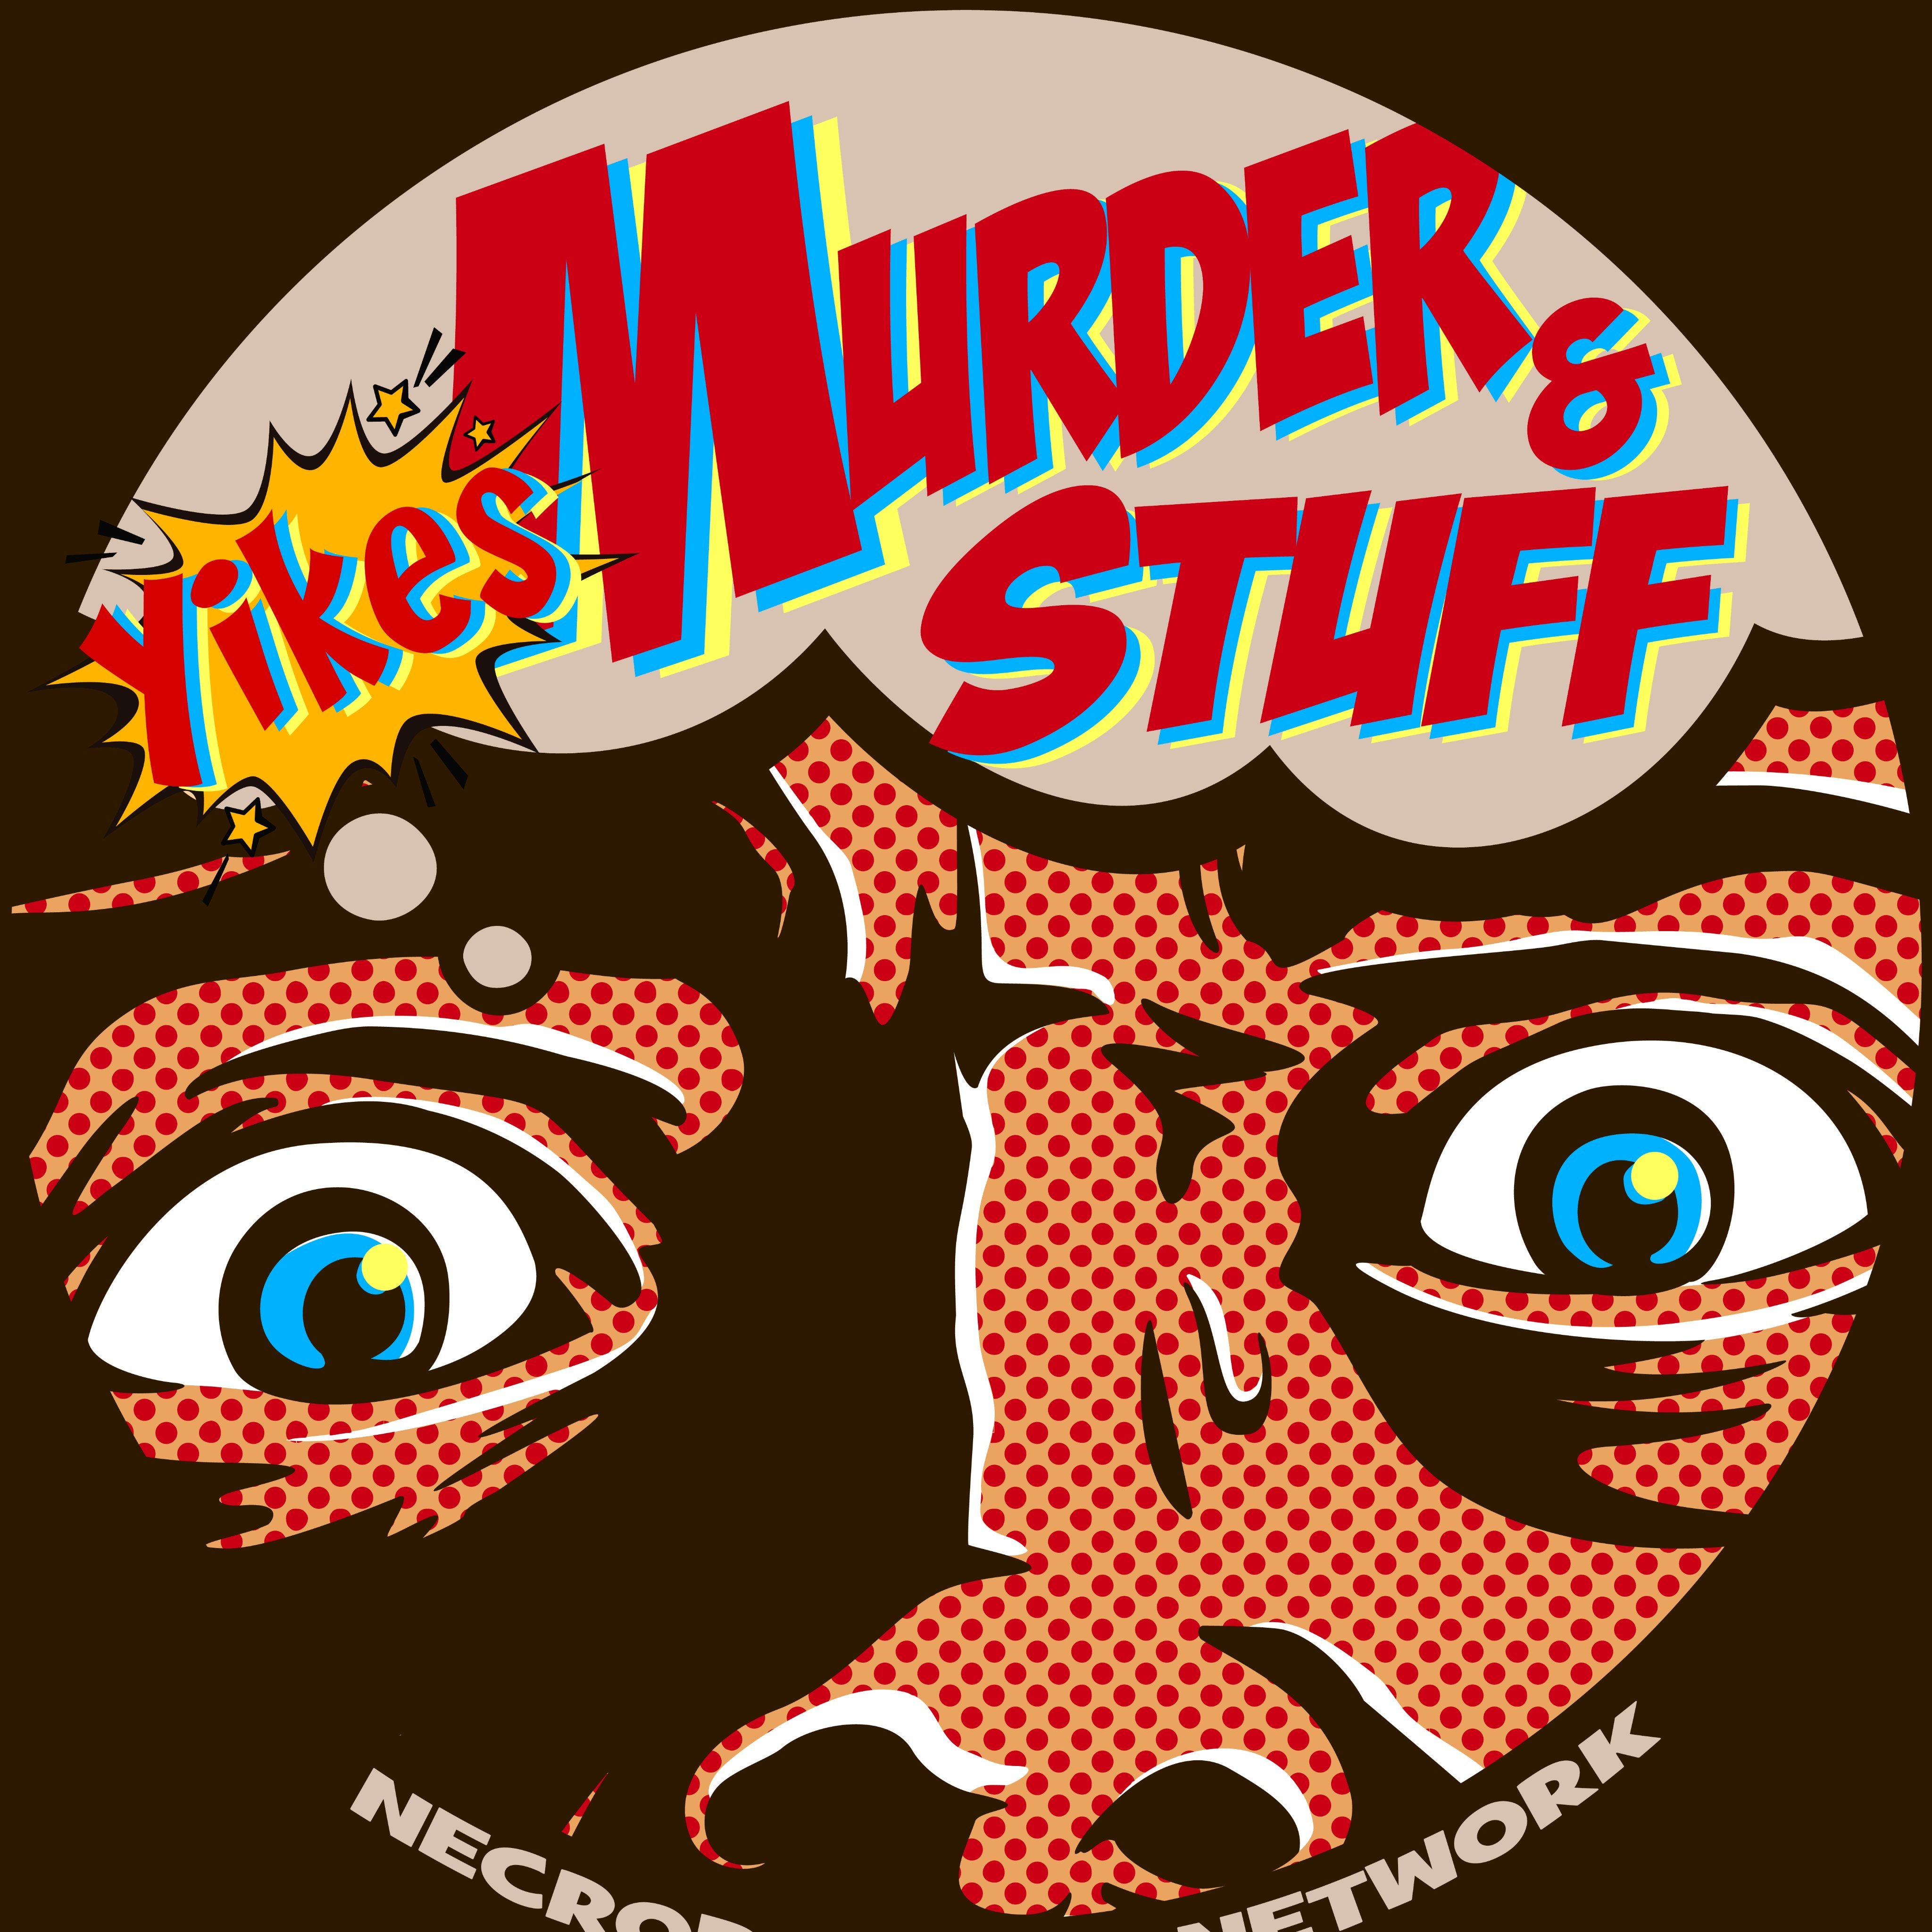 Yikes! Murder and Stuff Podcast